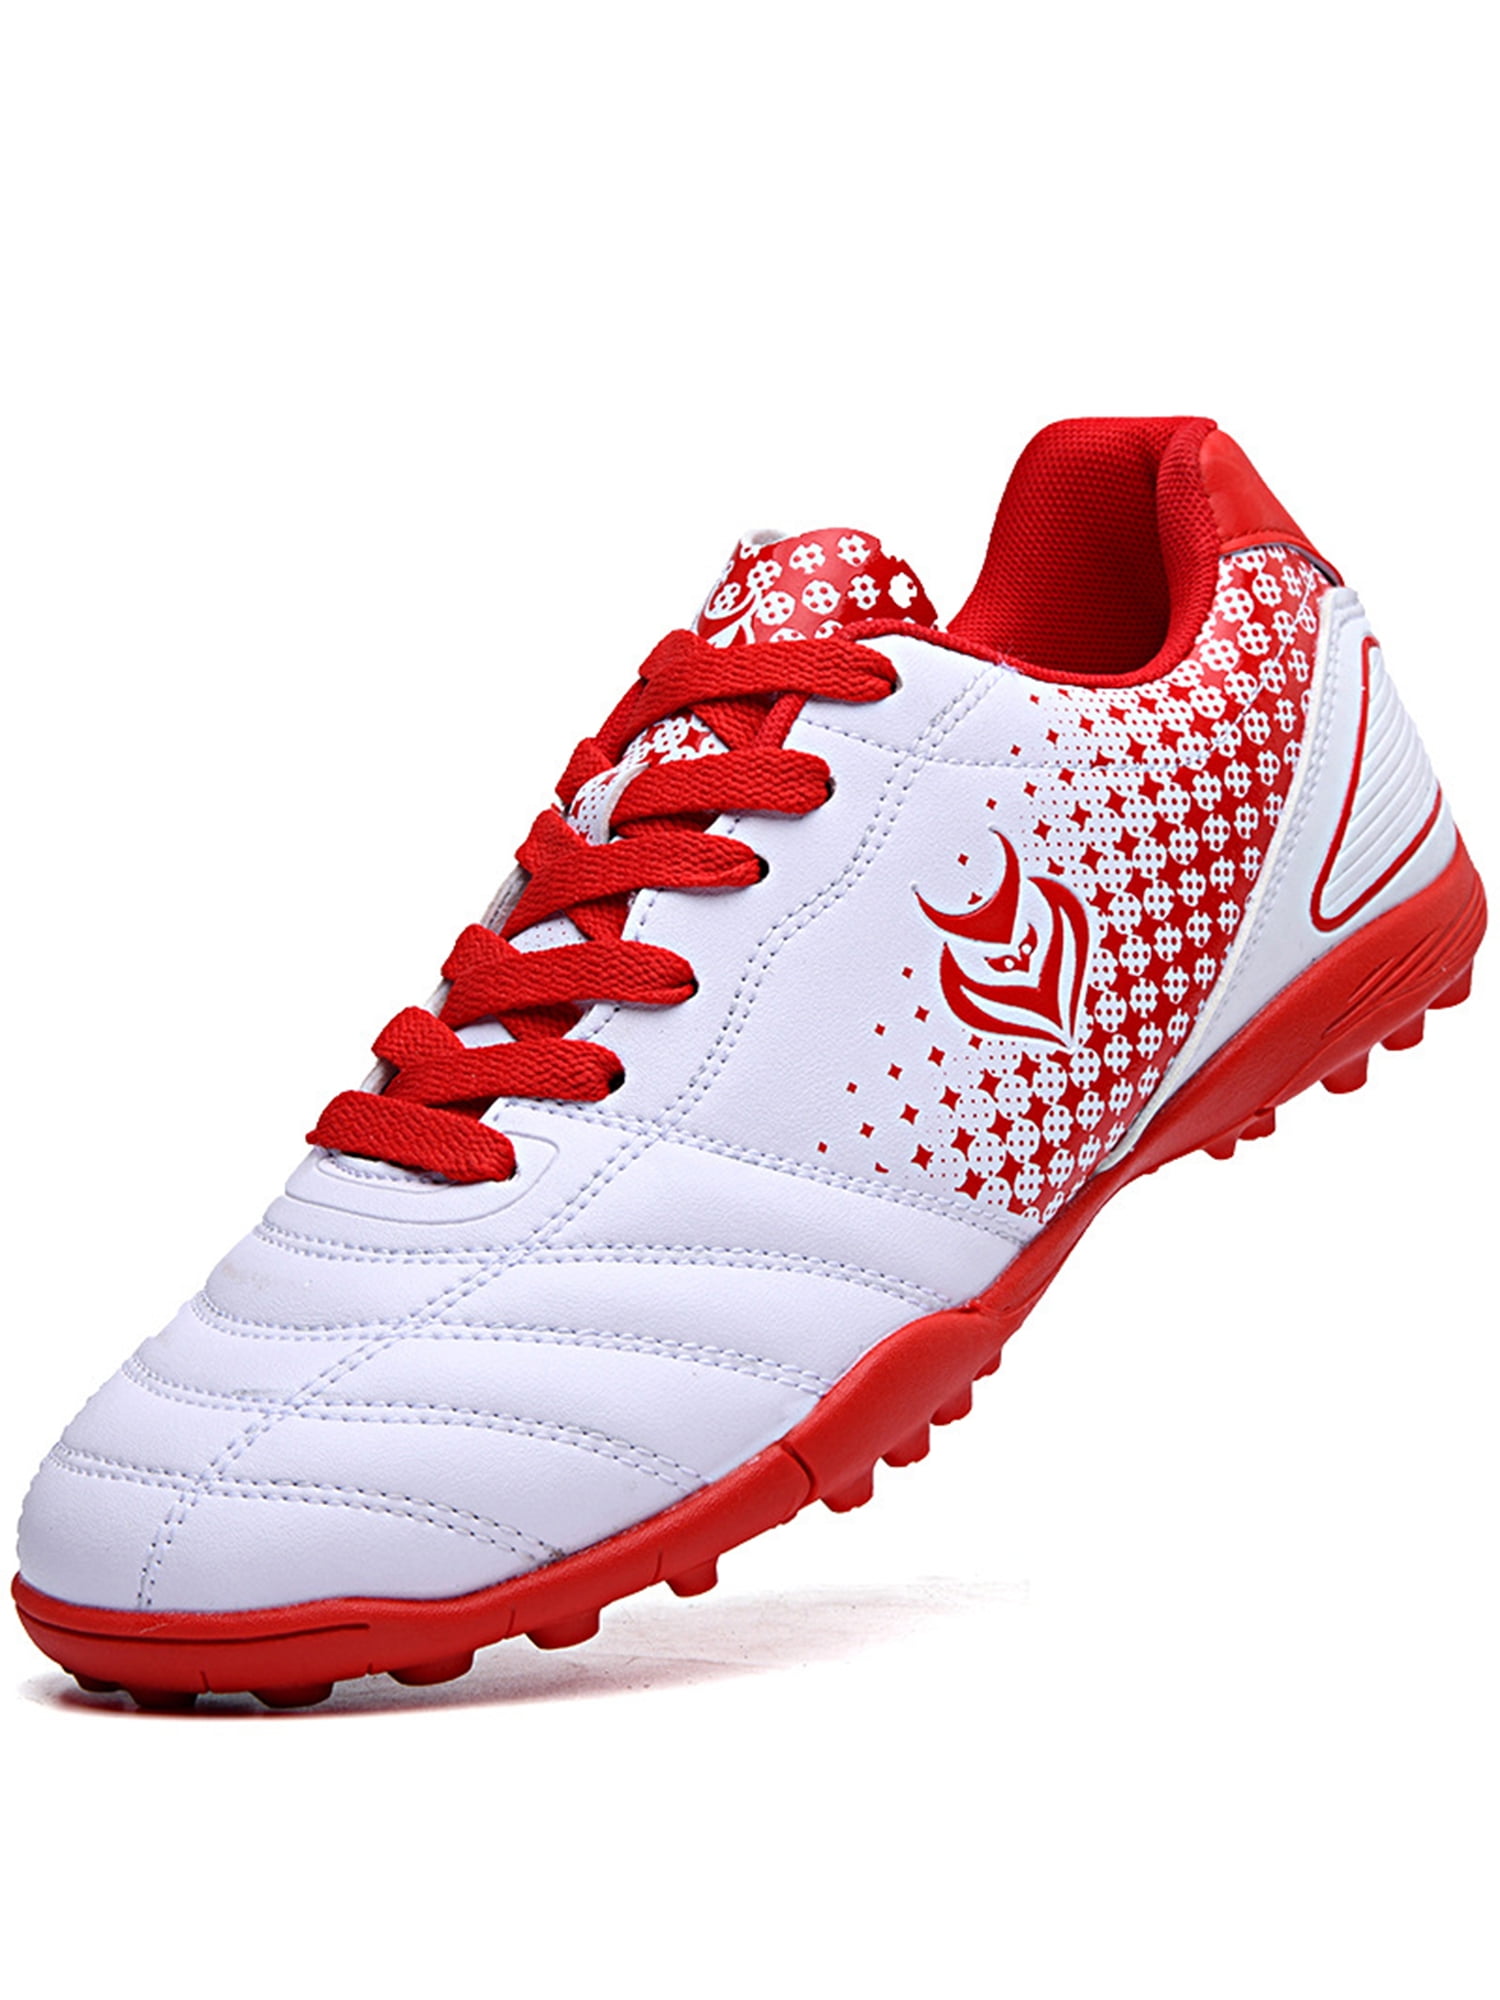 WALSTARUSA Walstar Mens Indoor Soccer Cleats Sneakers Shoes